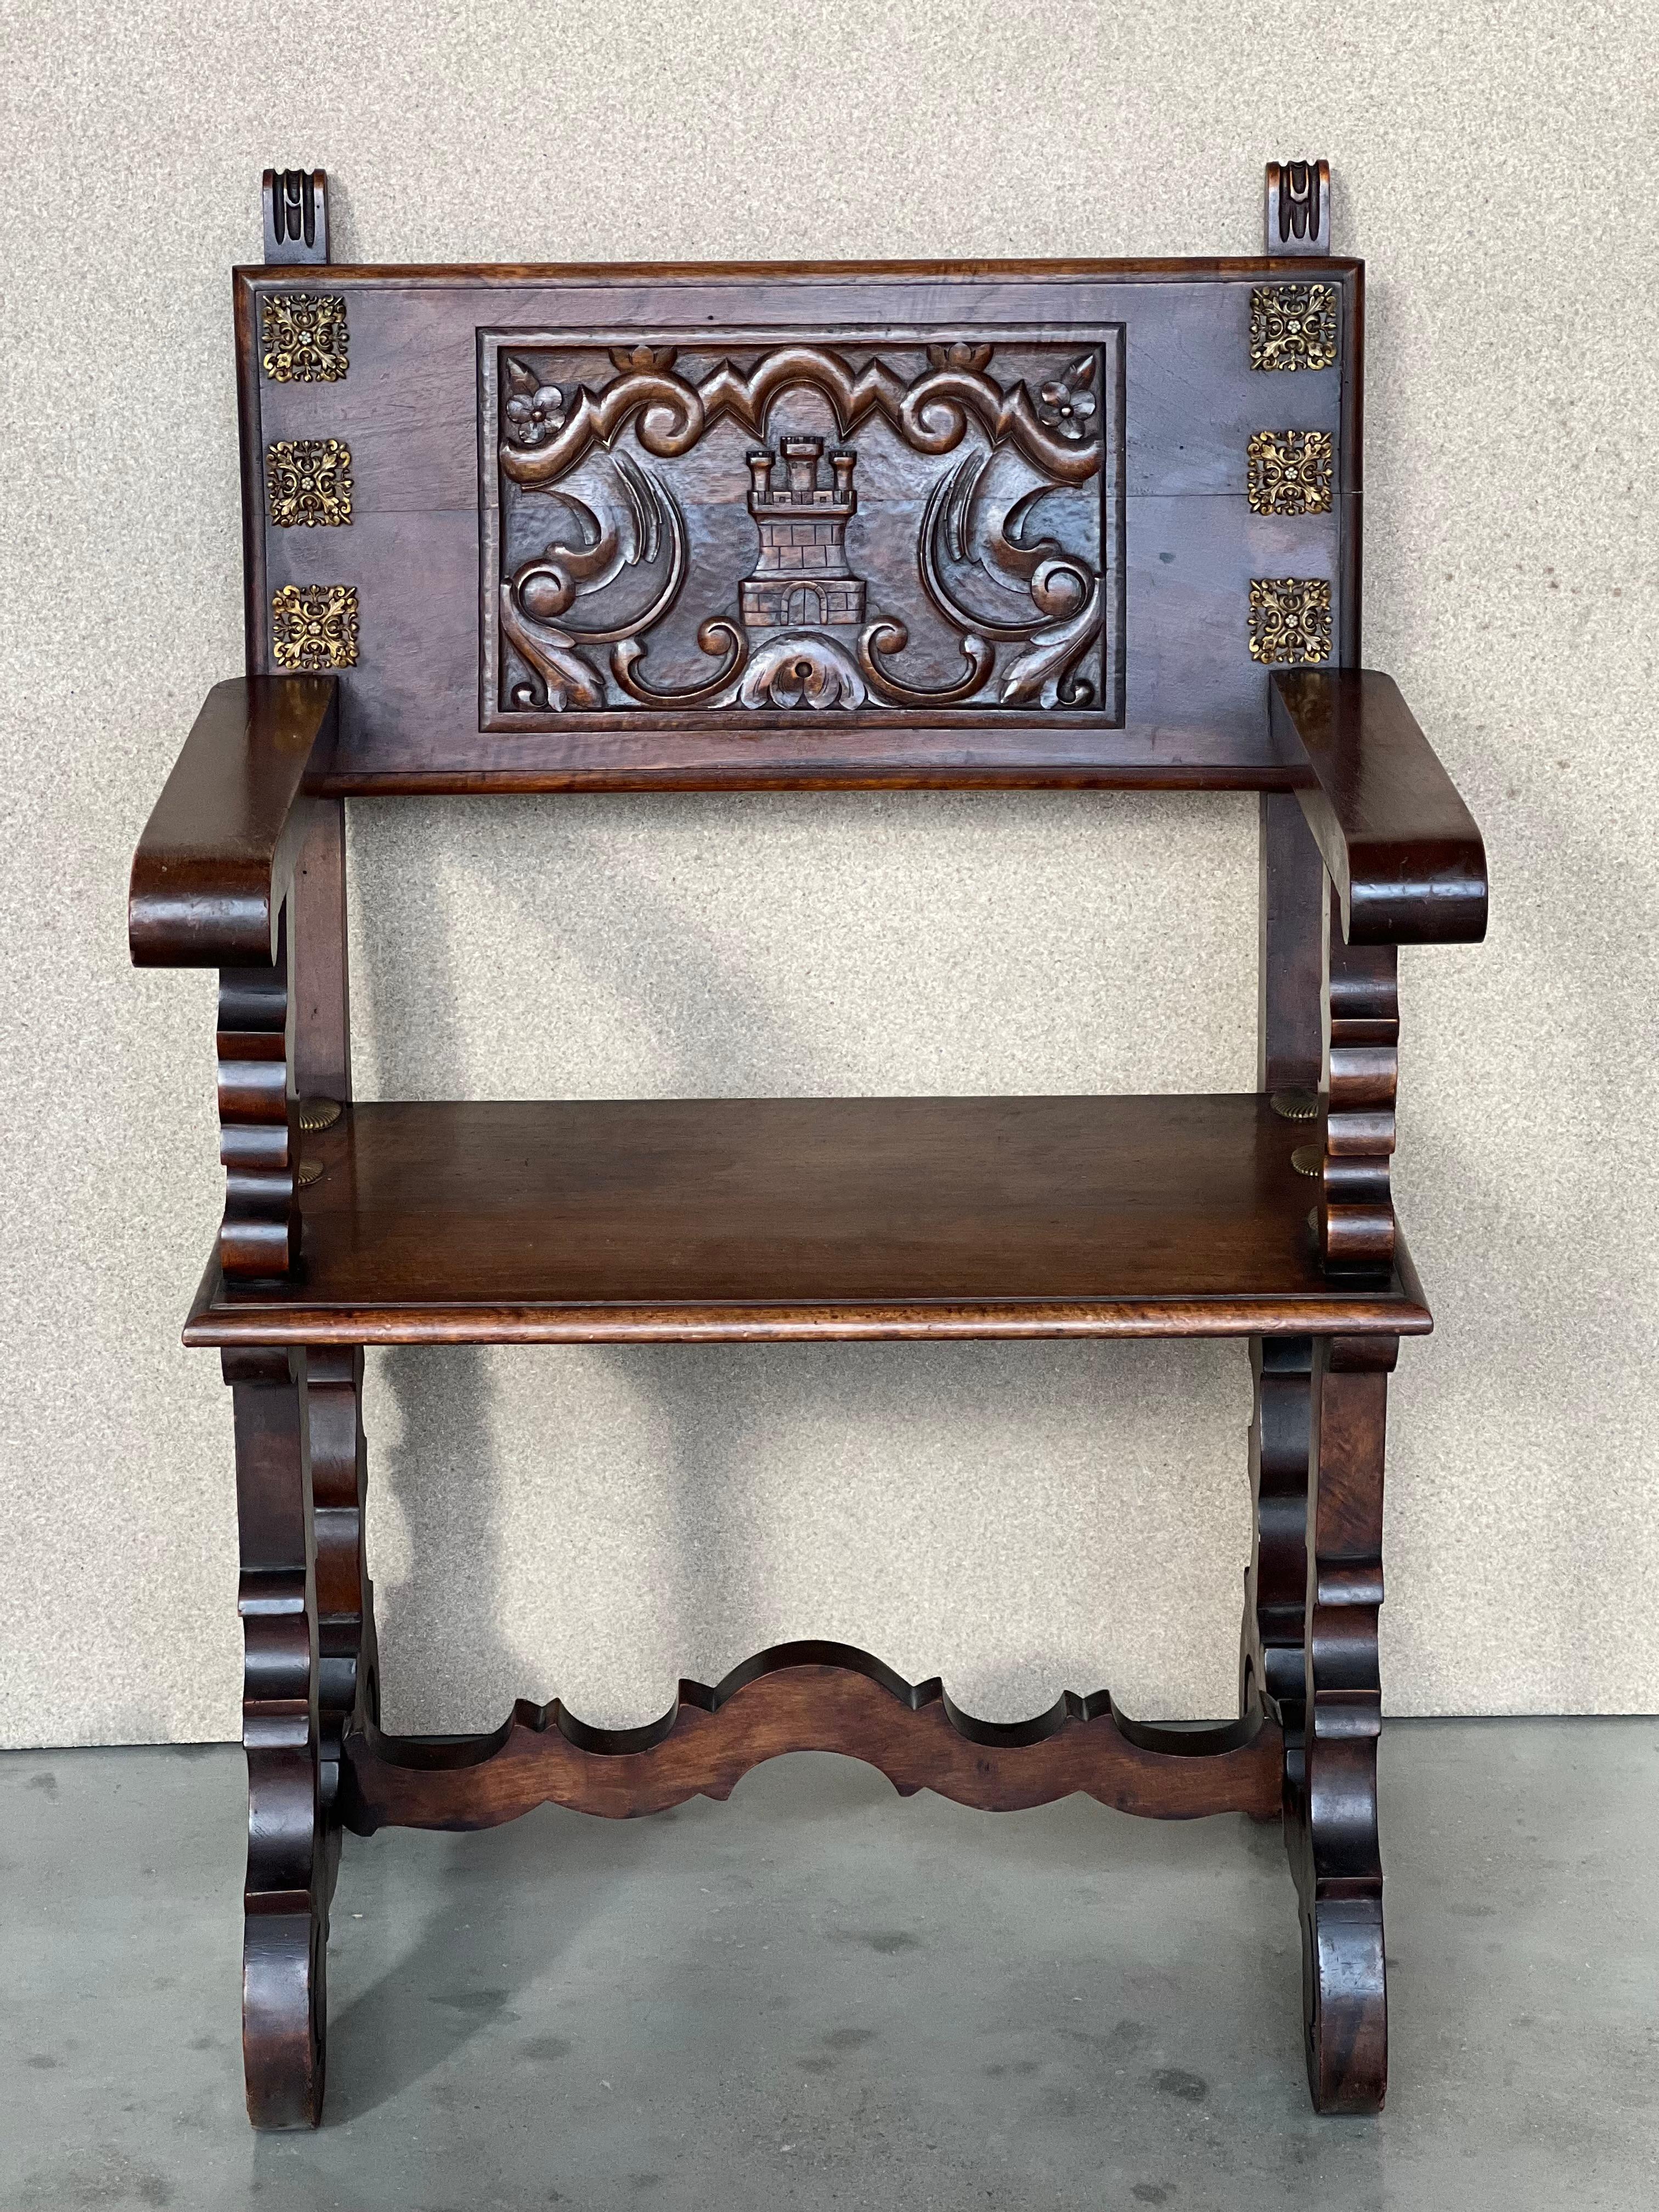 19th century walnut Spanish colonial altar armchairs with wood back with ornamental carved and wood seat. The unusual lyre legs complete this exceptional pair of armchairs
Measures: Height to arms 27.95 in.